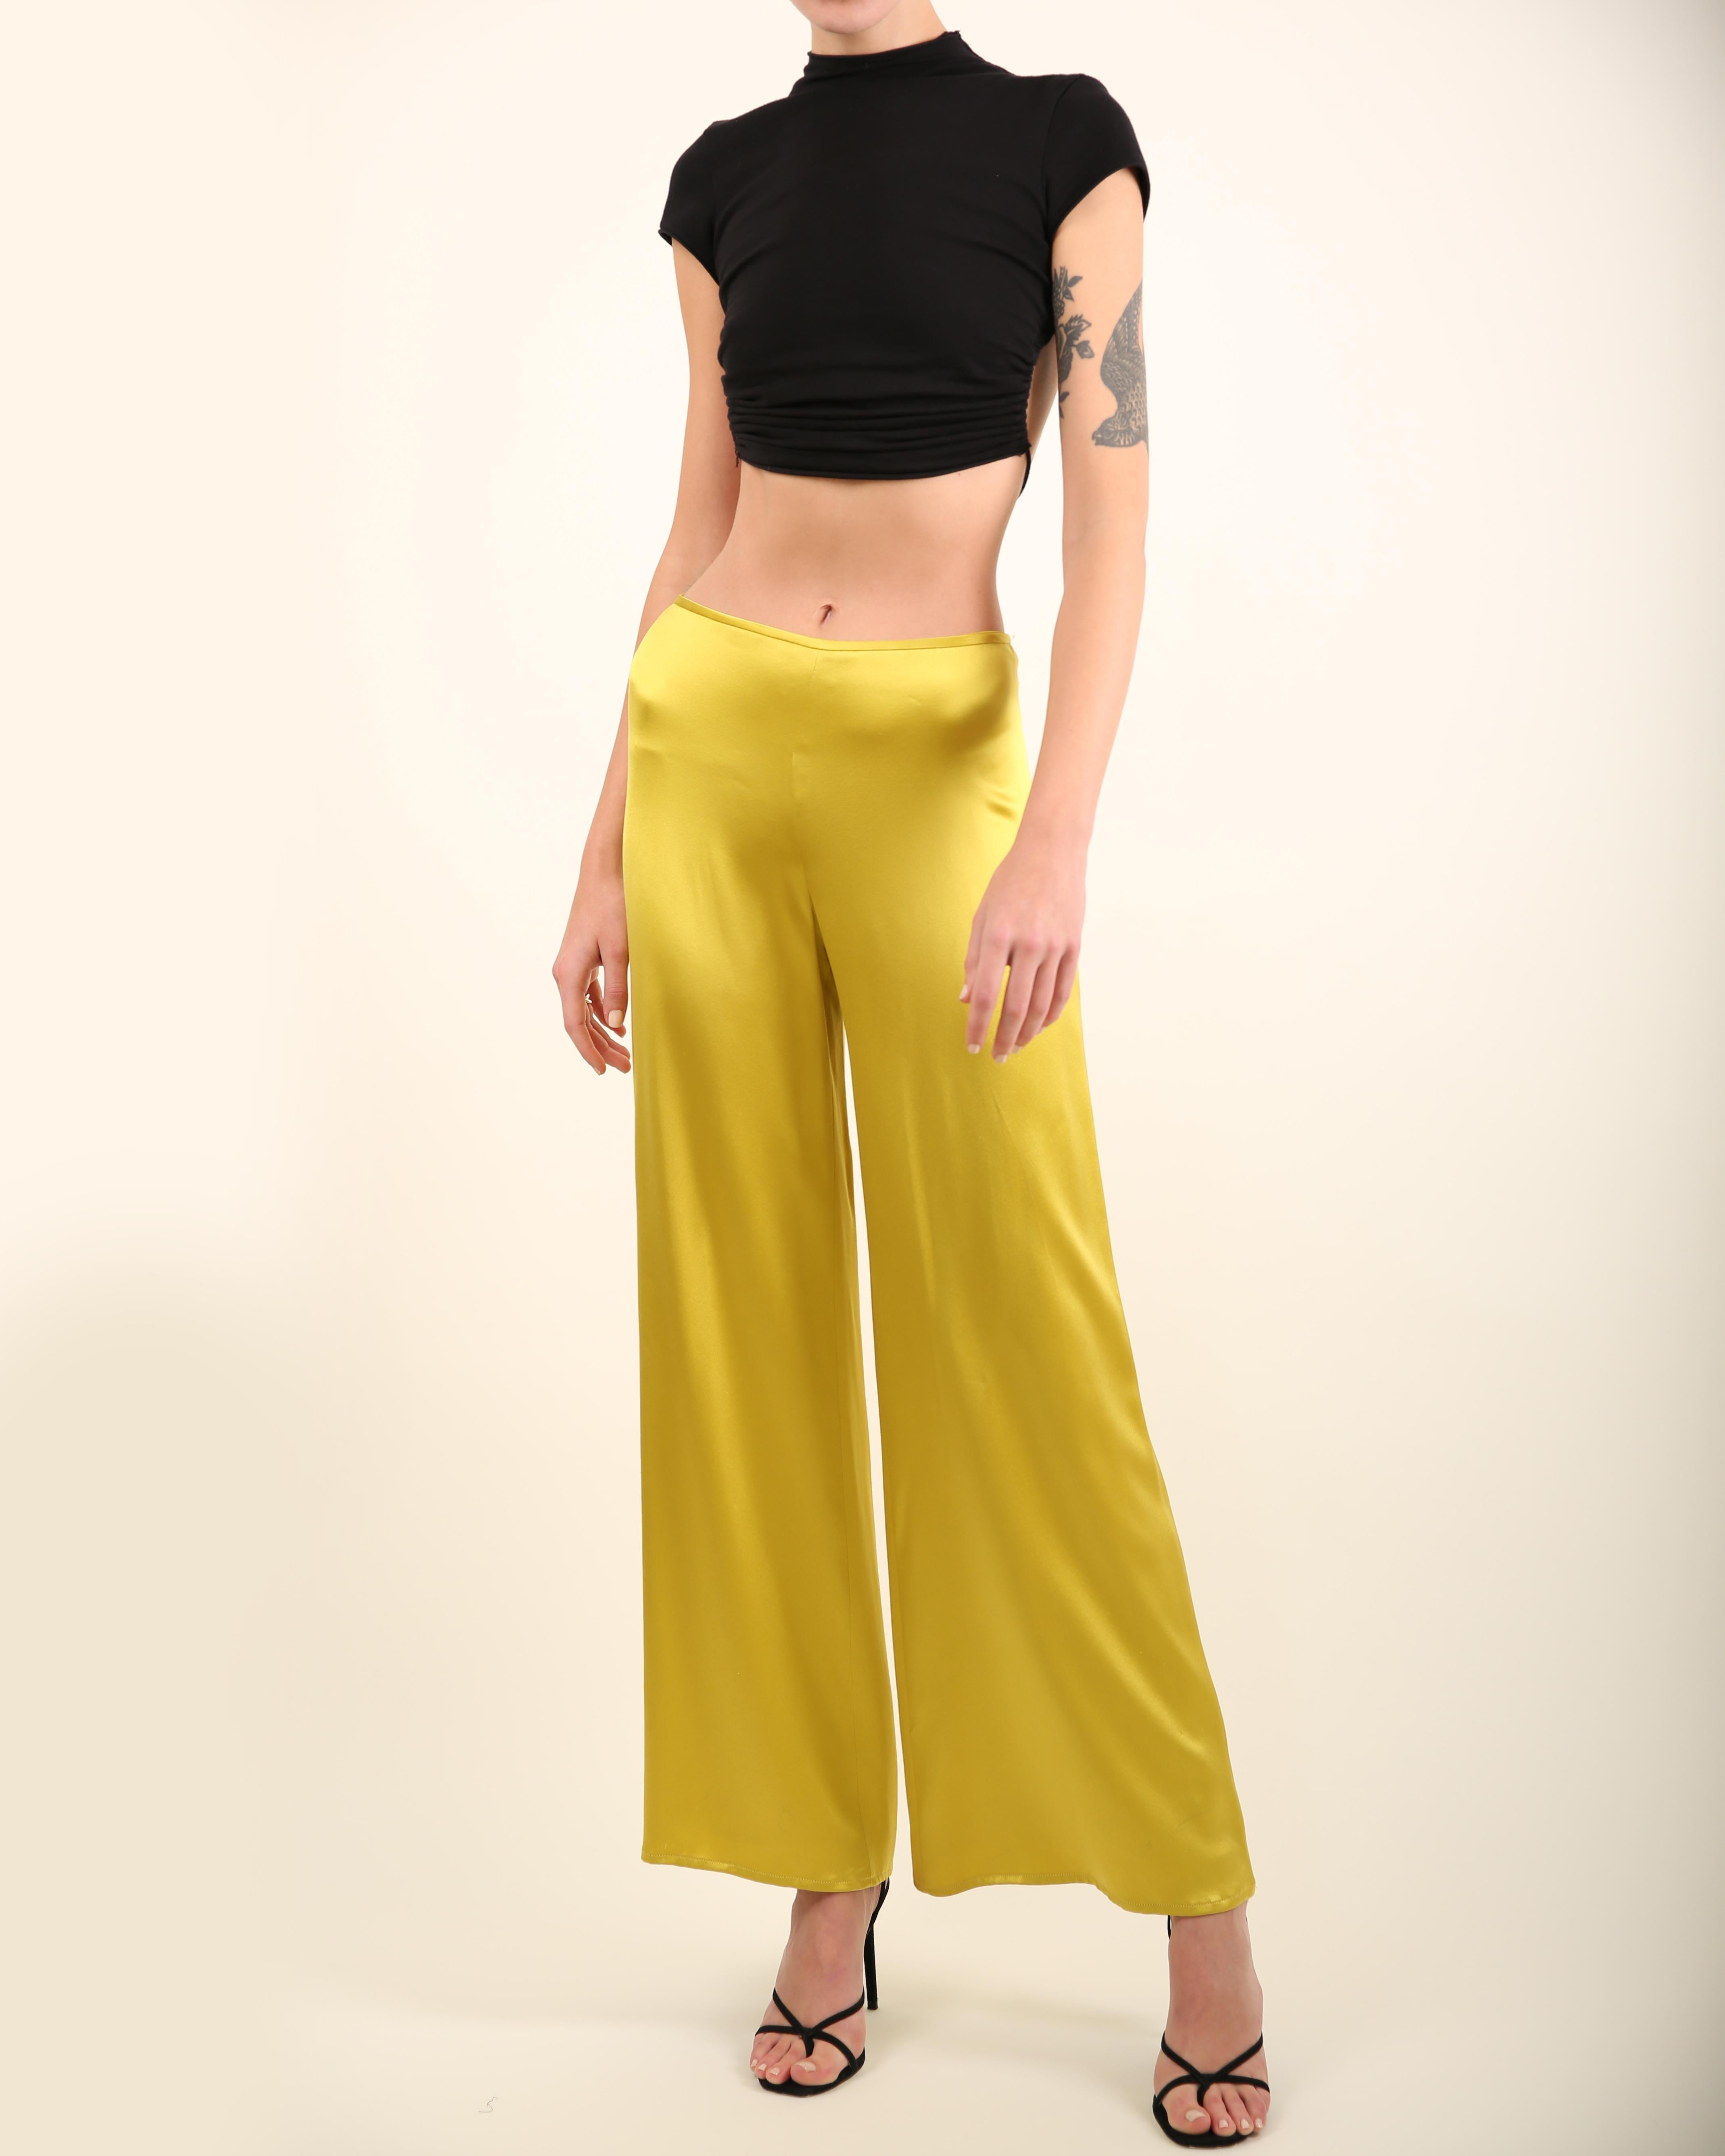 Naeem Khan wide leg trouser pants in a gorgeous shade of bright chartreuse 
Wear these high or low on the waist depending on the desired fit

FREE SHIPPING WORLDWIDE!!!

Composition
100% Silk

Size
US 4

In good condition with some slight marks,